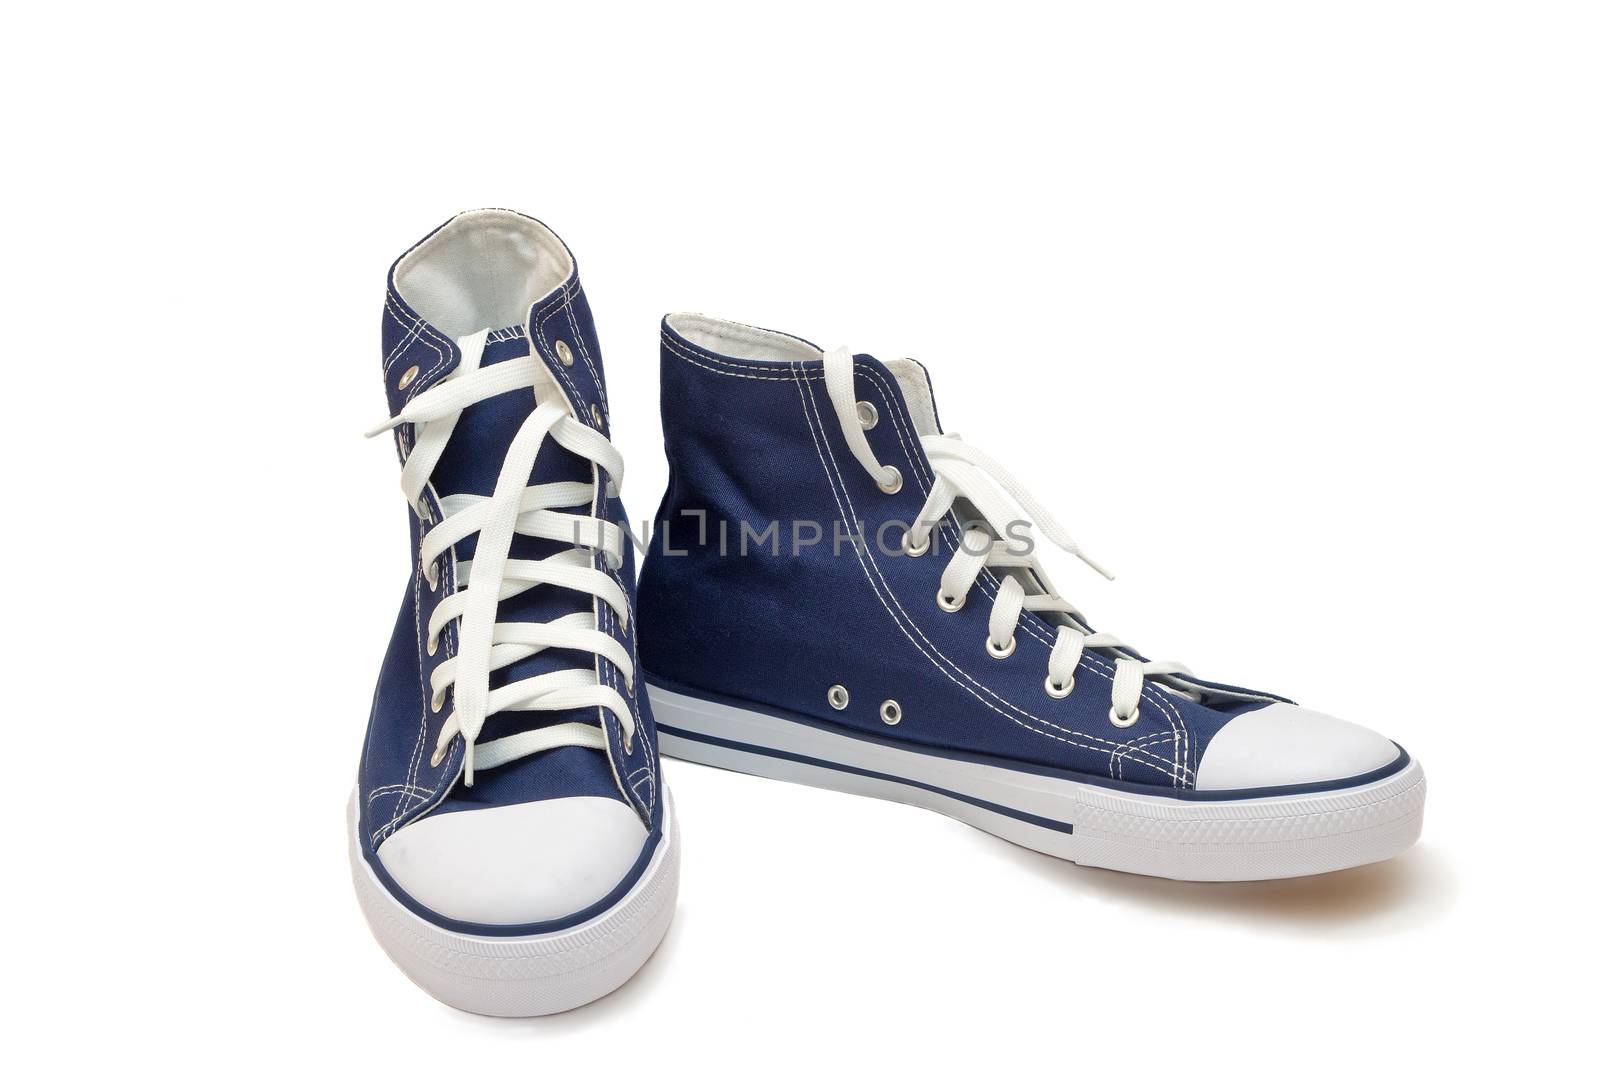 Athletic shoes - men's sneakers on a white background. by georgina198